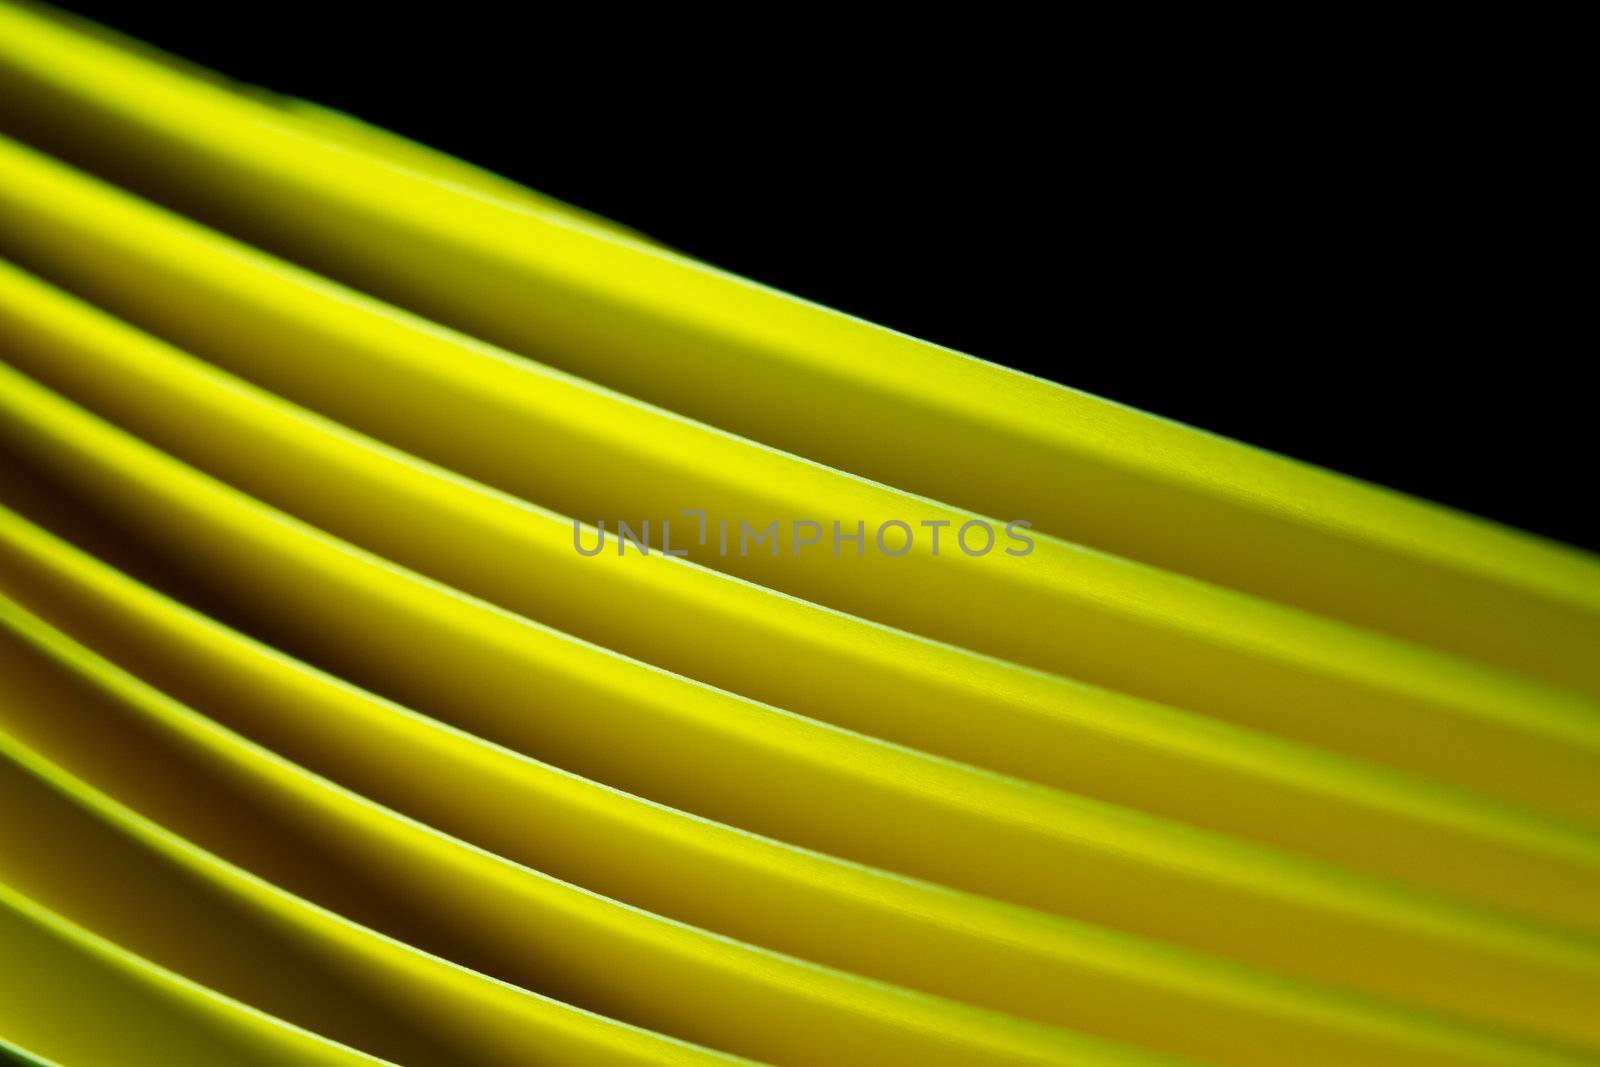 blurred edges of yellow A$ paper illuminated with LED lights on black background